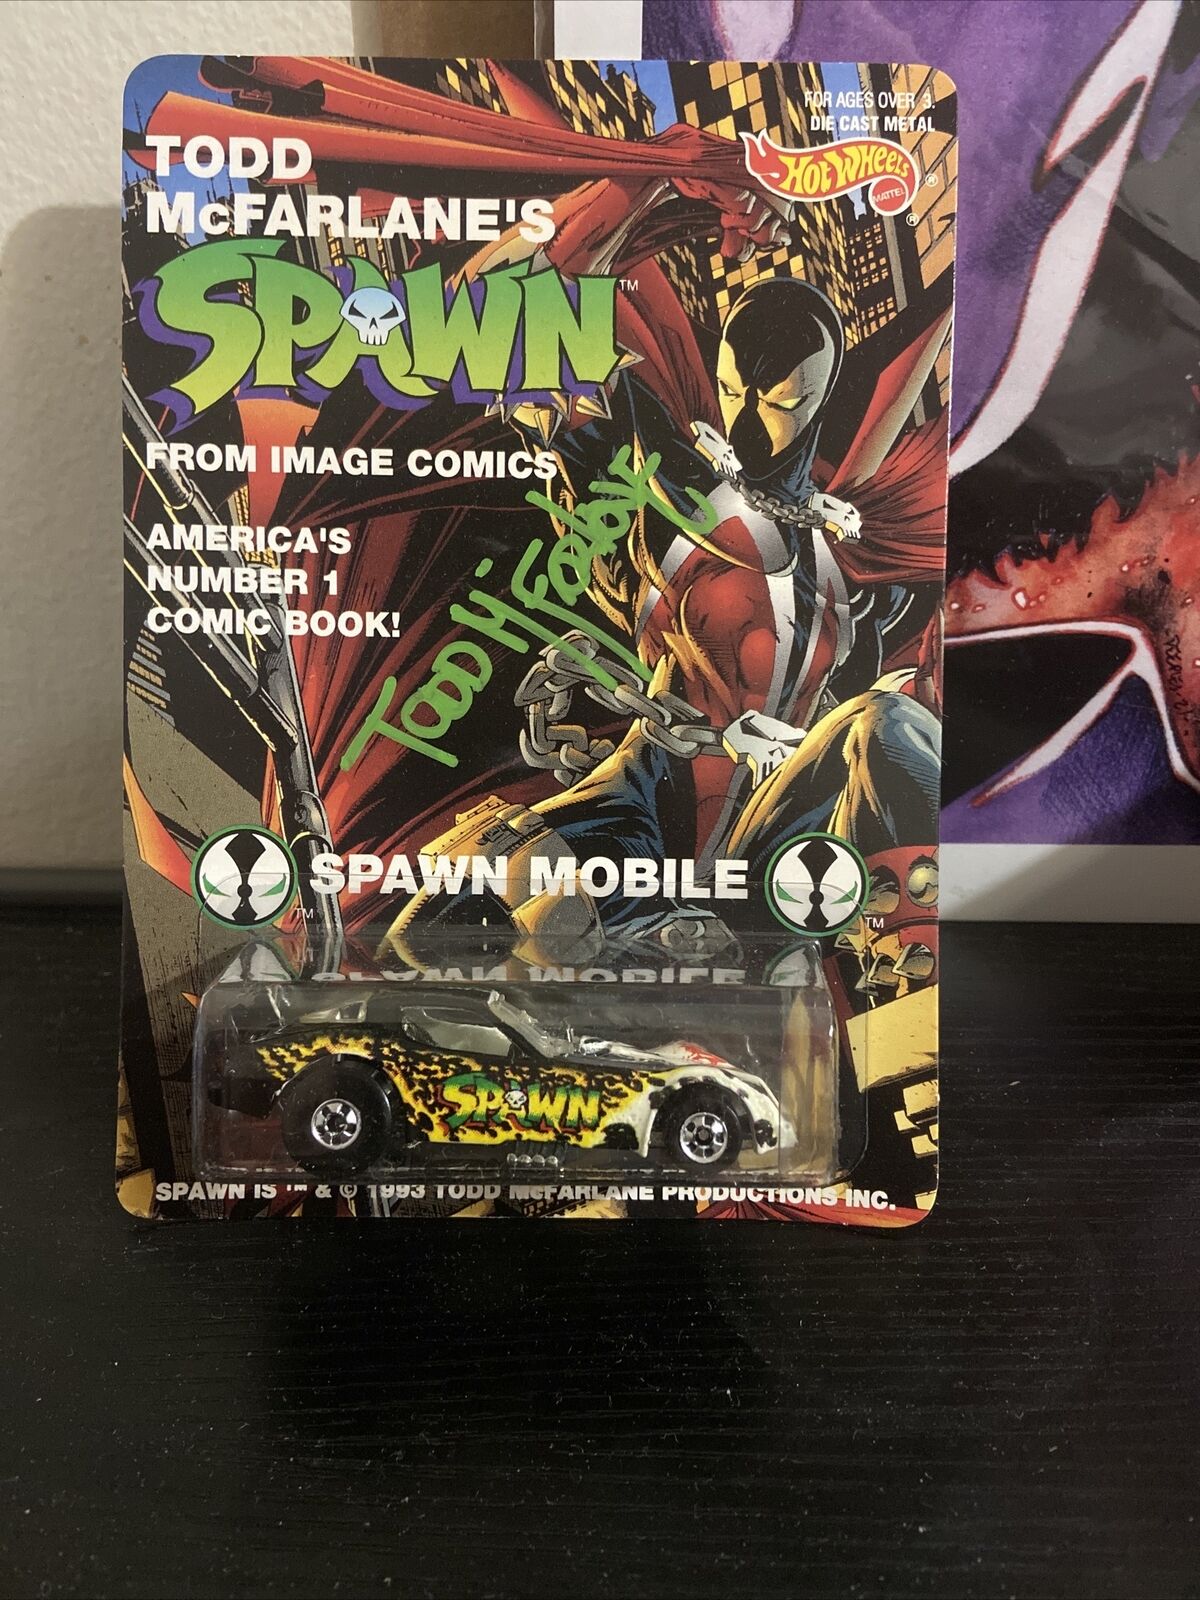 SPAWN HOT WHEELS CAR SIGNED TODD MCFARLANE 2023 SDCC EXCLUSIVE 1993 SPAWN MOBILE